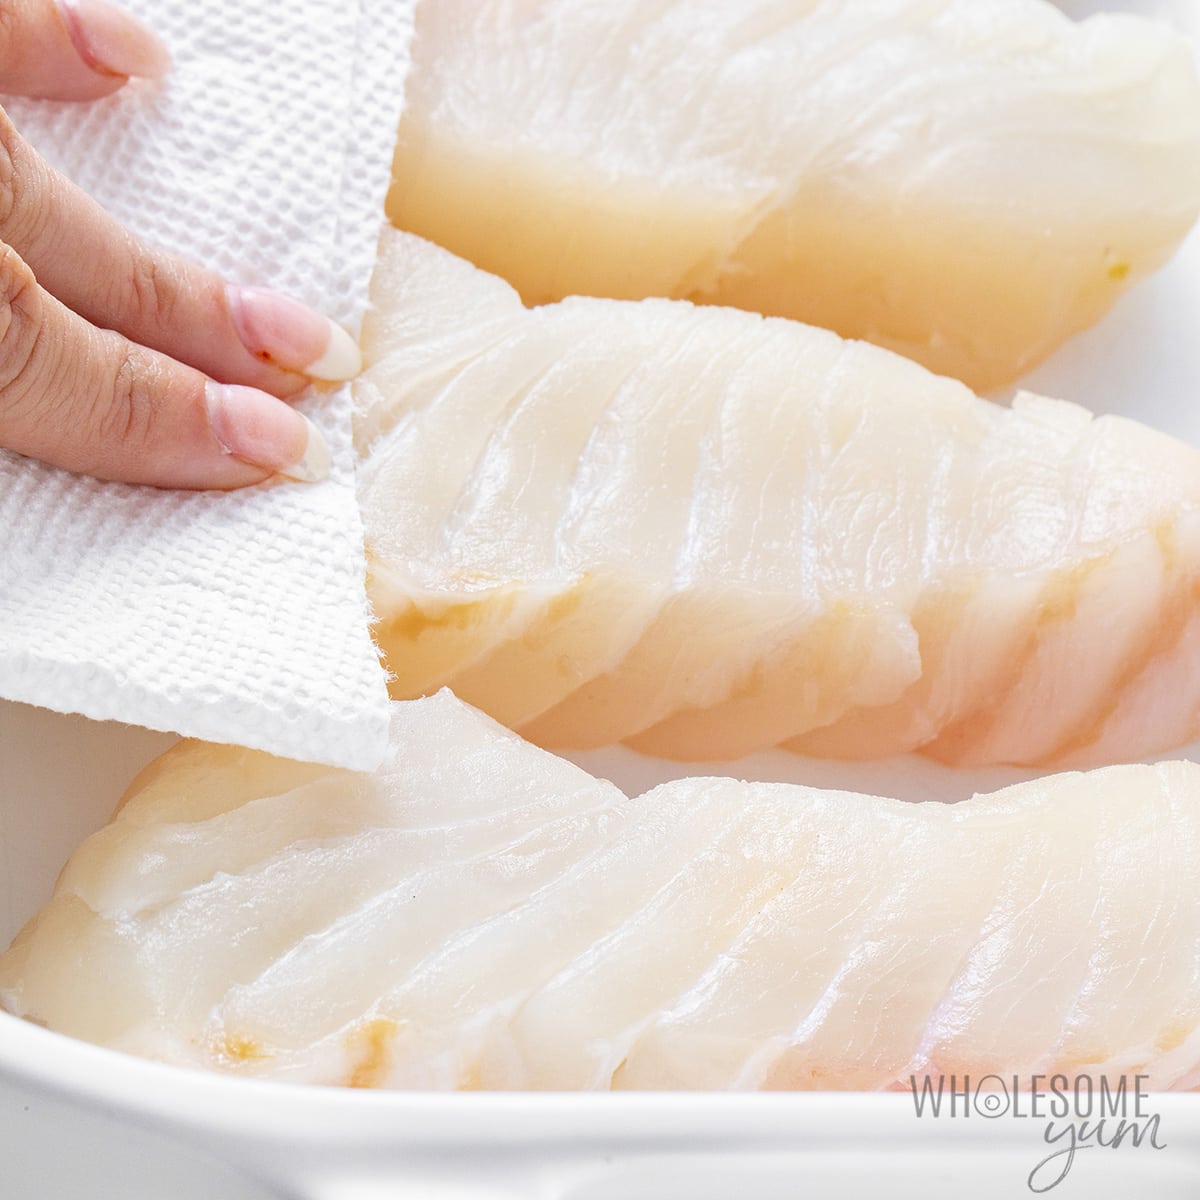 Drying halibut fillets with paper towels.